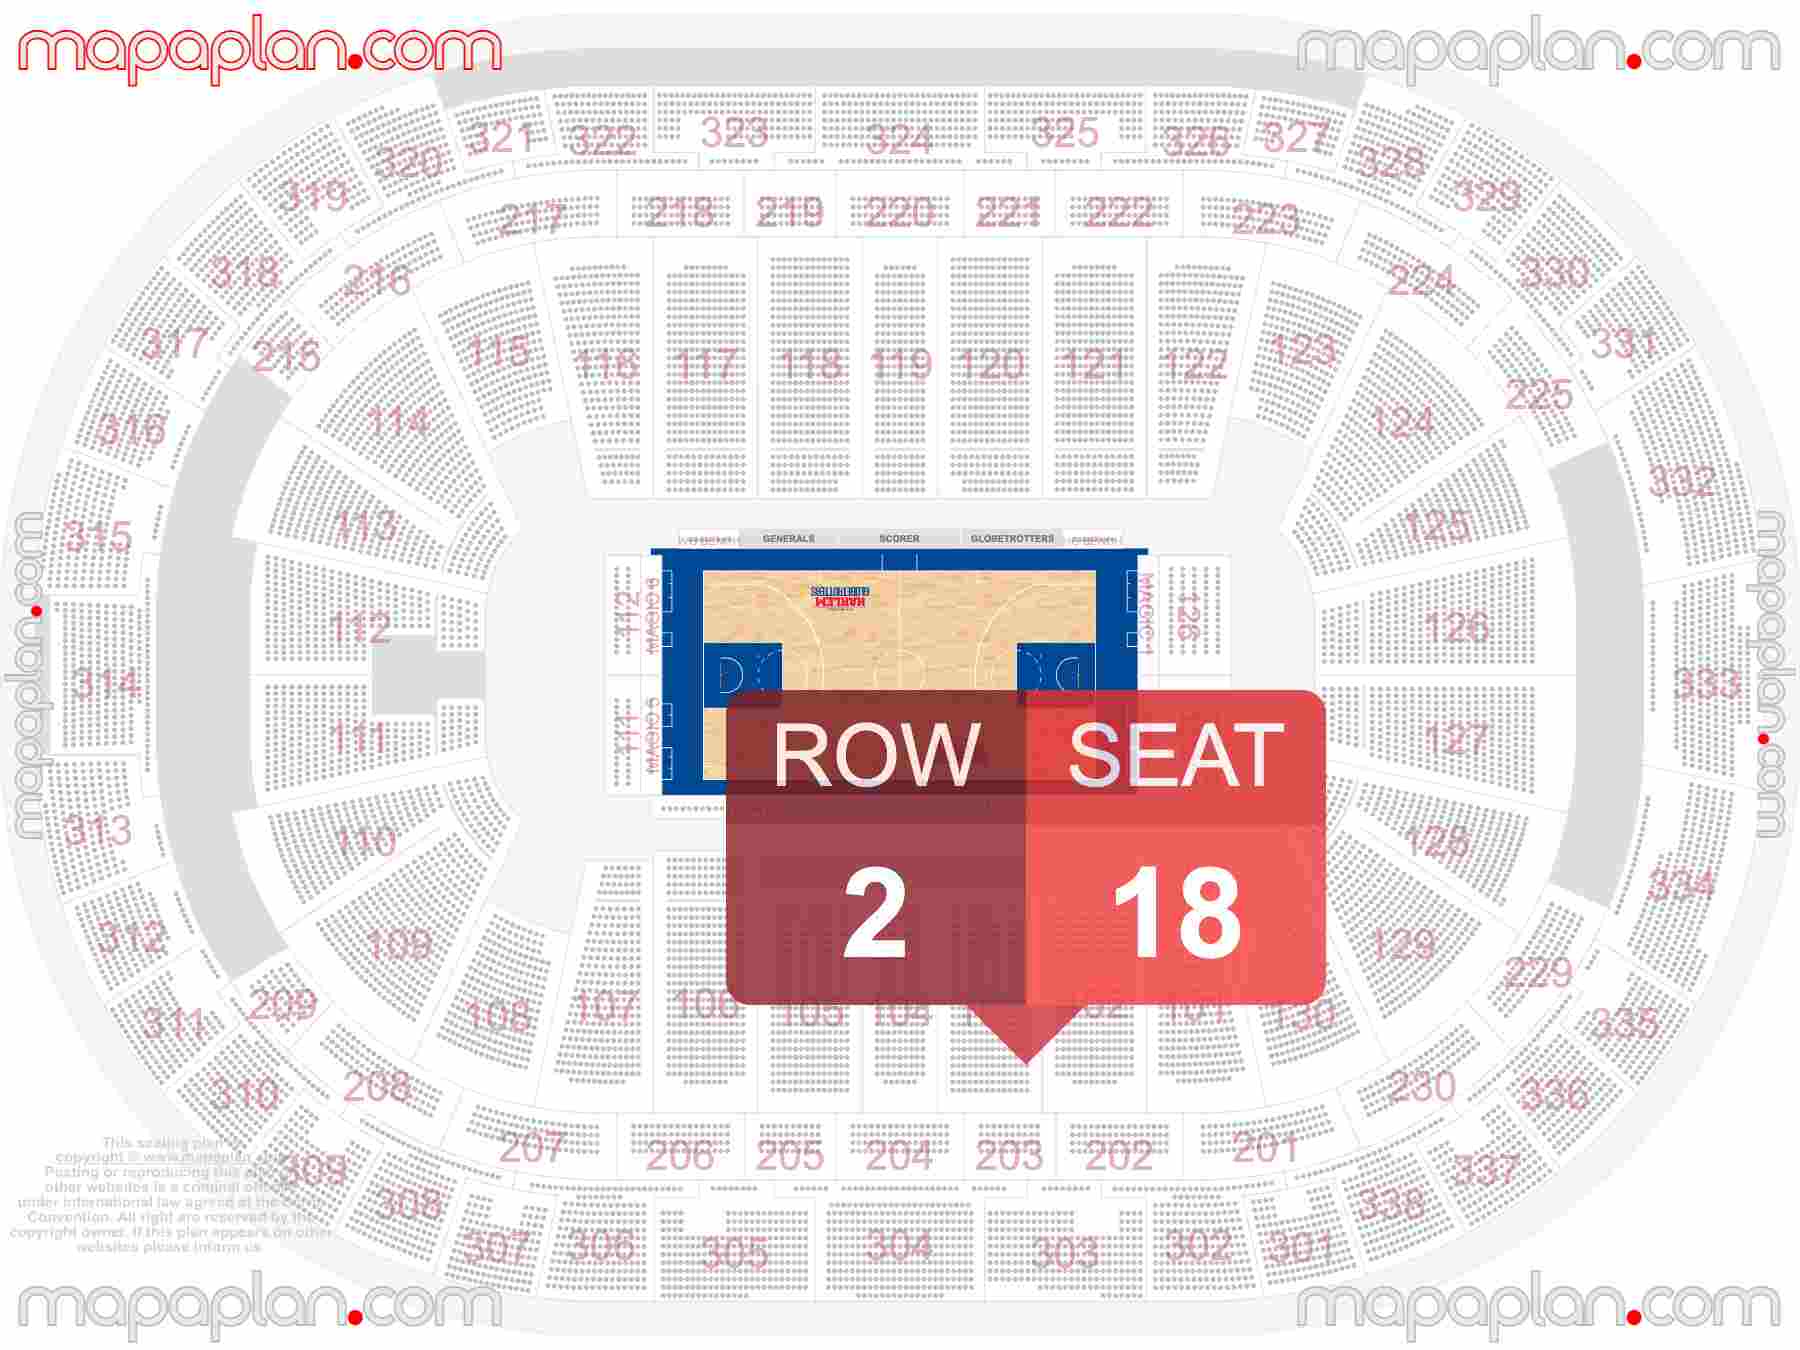 Raleigh PNC Arena seating chart NC State Wolfpack basketball find best seats row numbering system plan showing how many seats per row - Individual 'find my seat' virtual locator